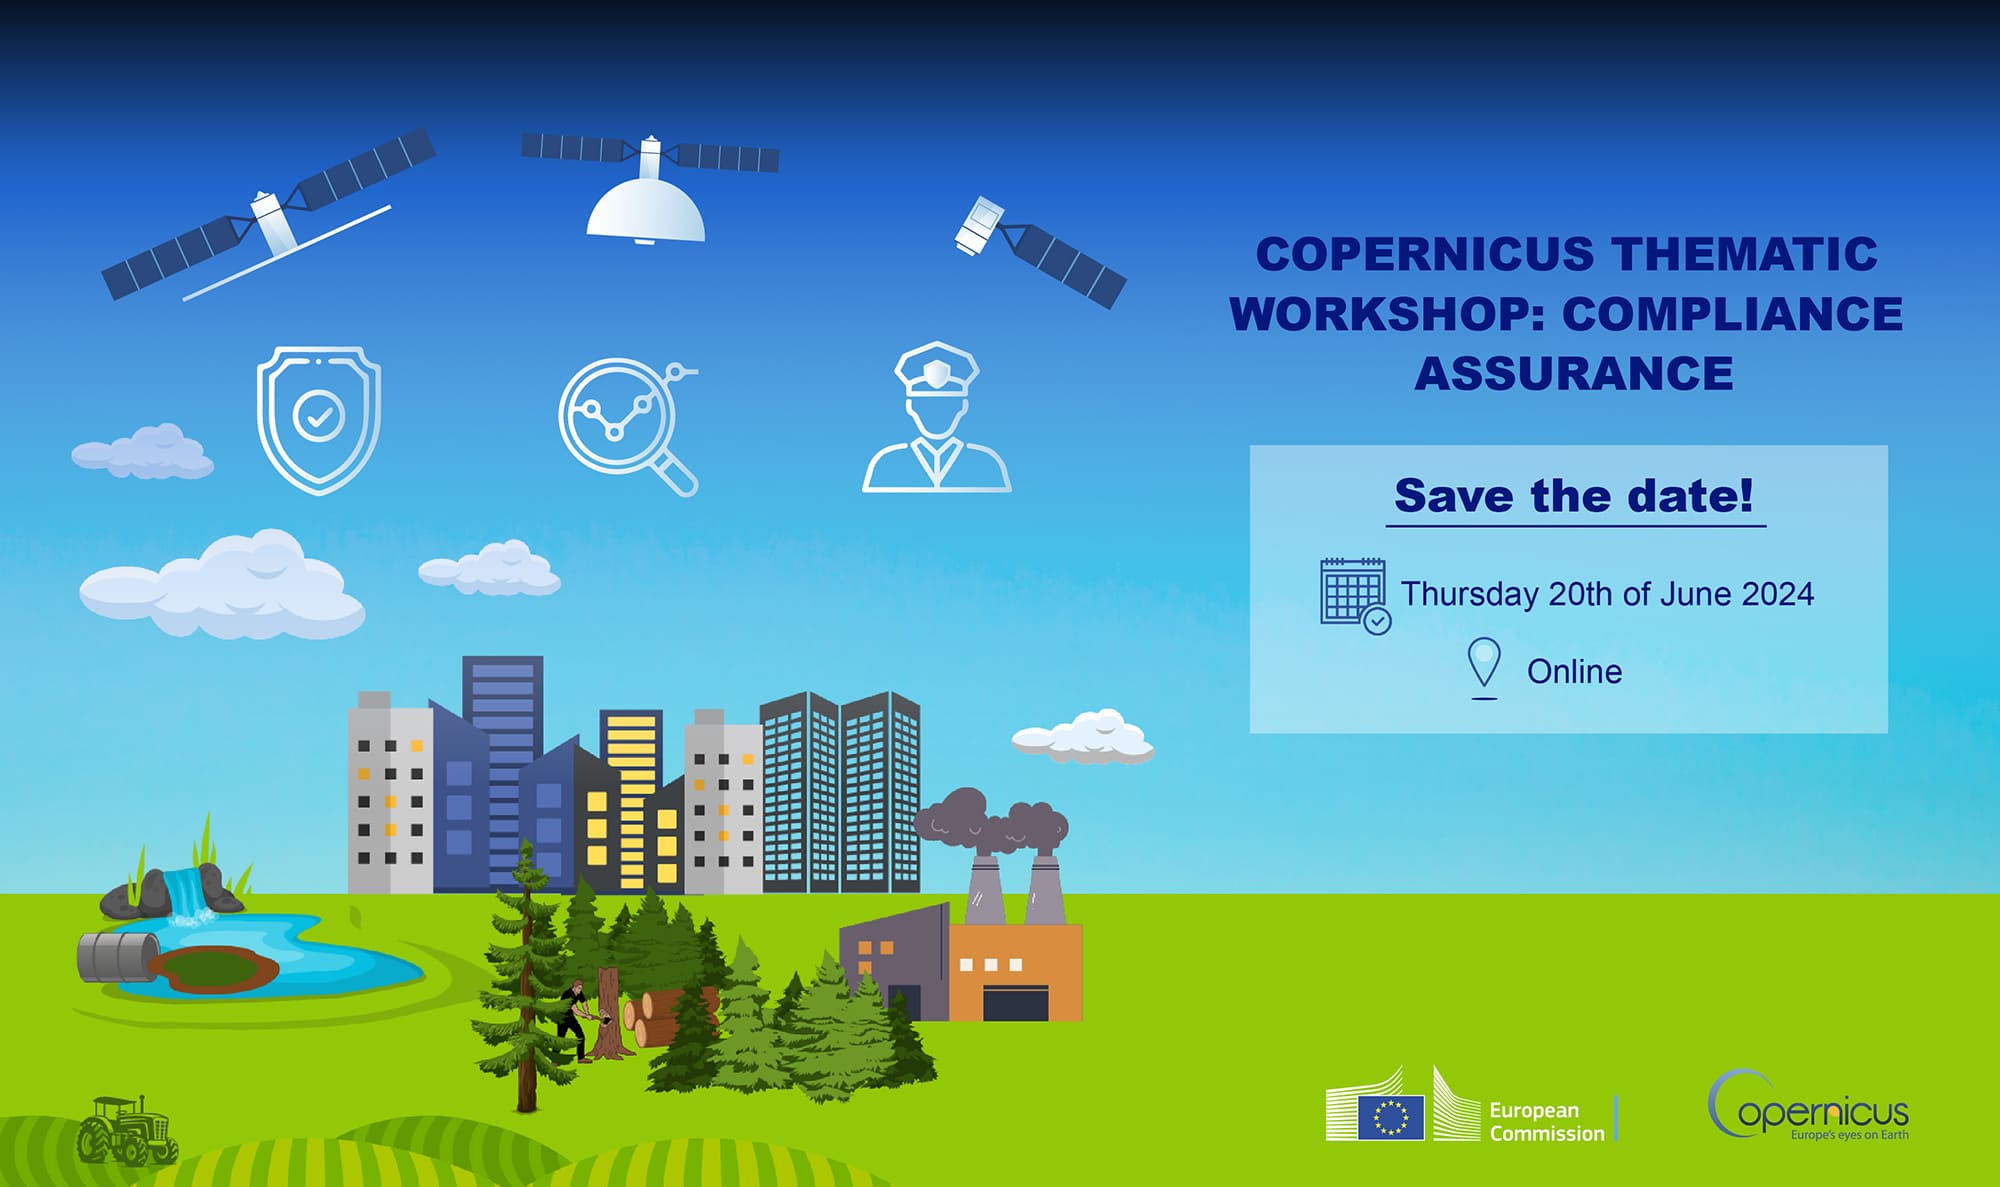 Copernicus Thematic Workshop on Compliance Assurance